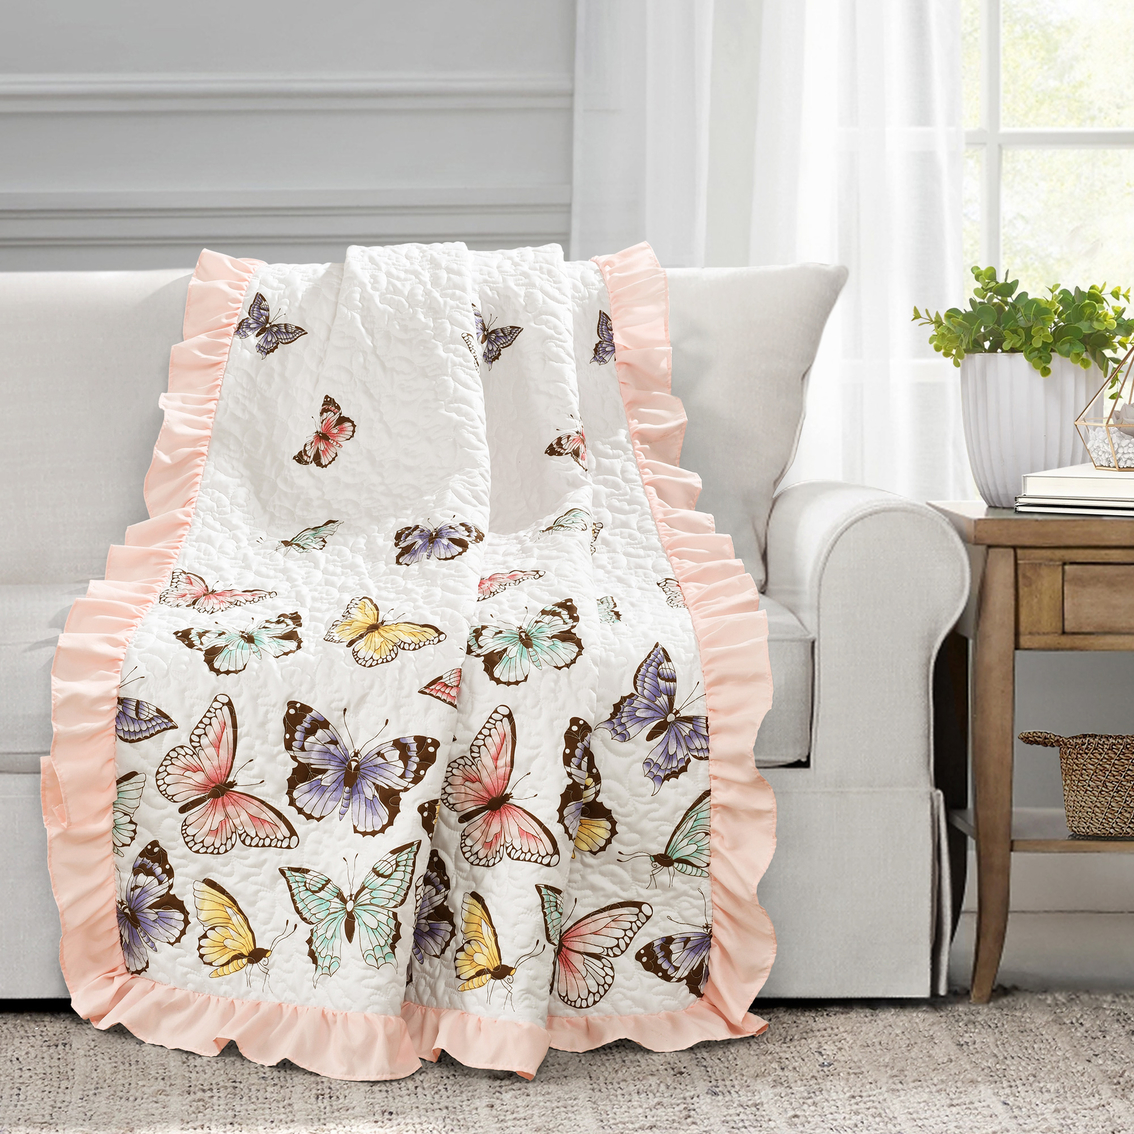 Lush Decor Flutter Butterfly Throw - Image 2 of 4